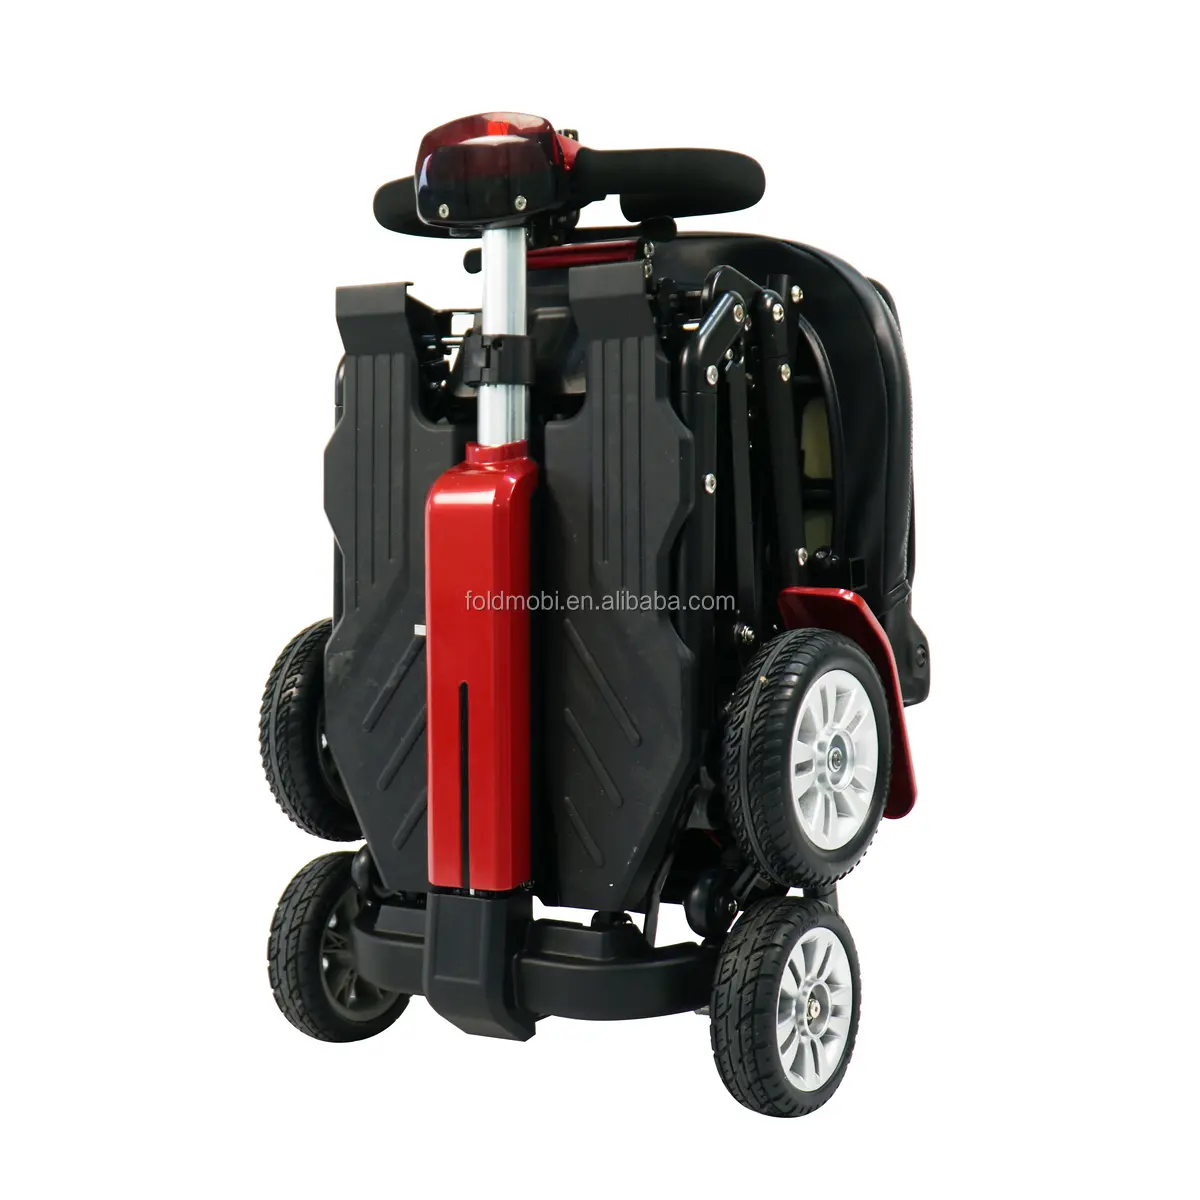 Folding Travel Trunk Luggage Mobility Electric Scooter